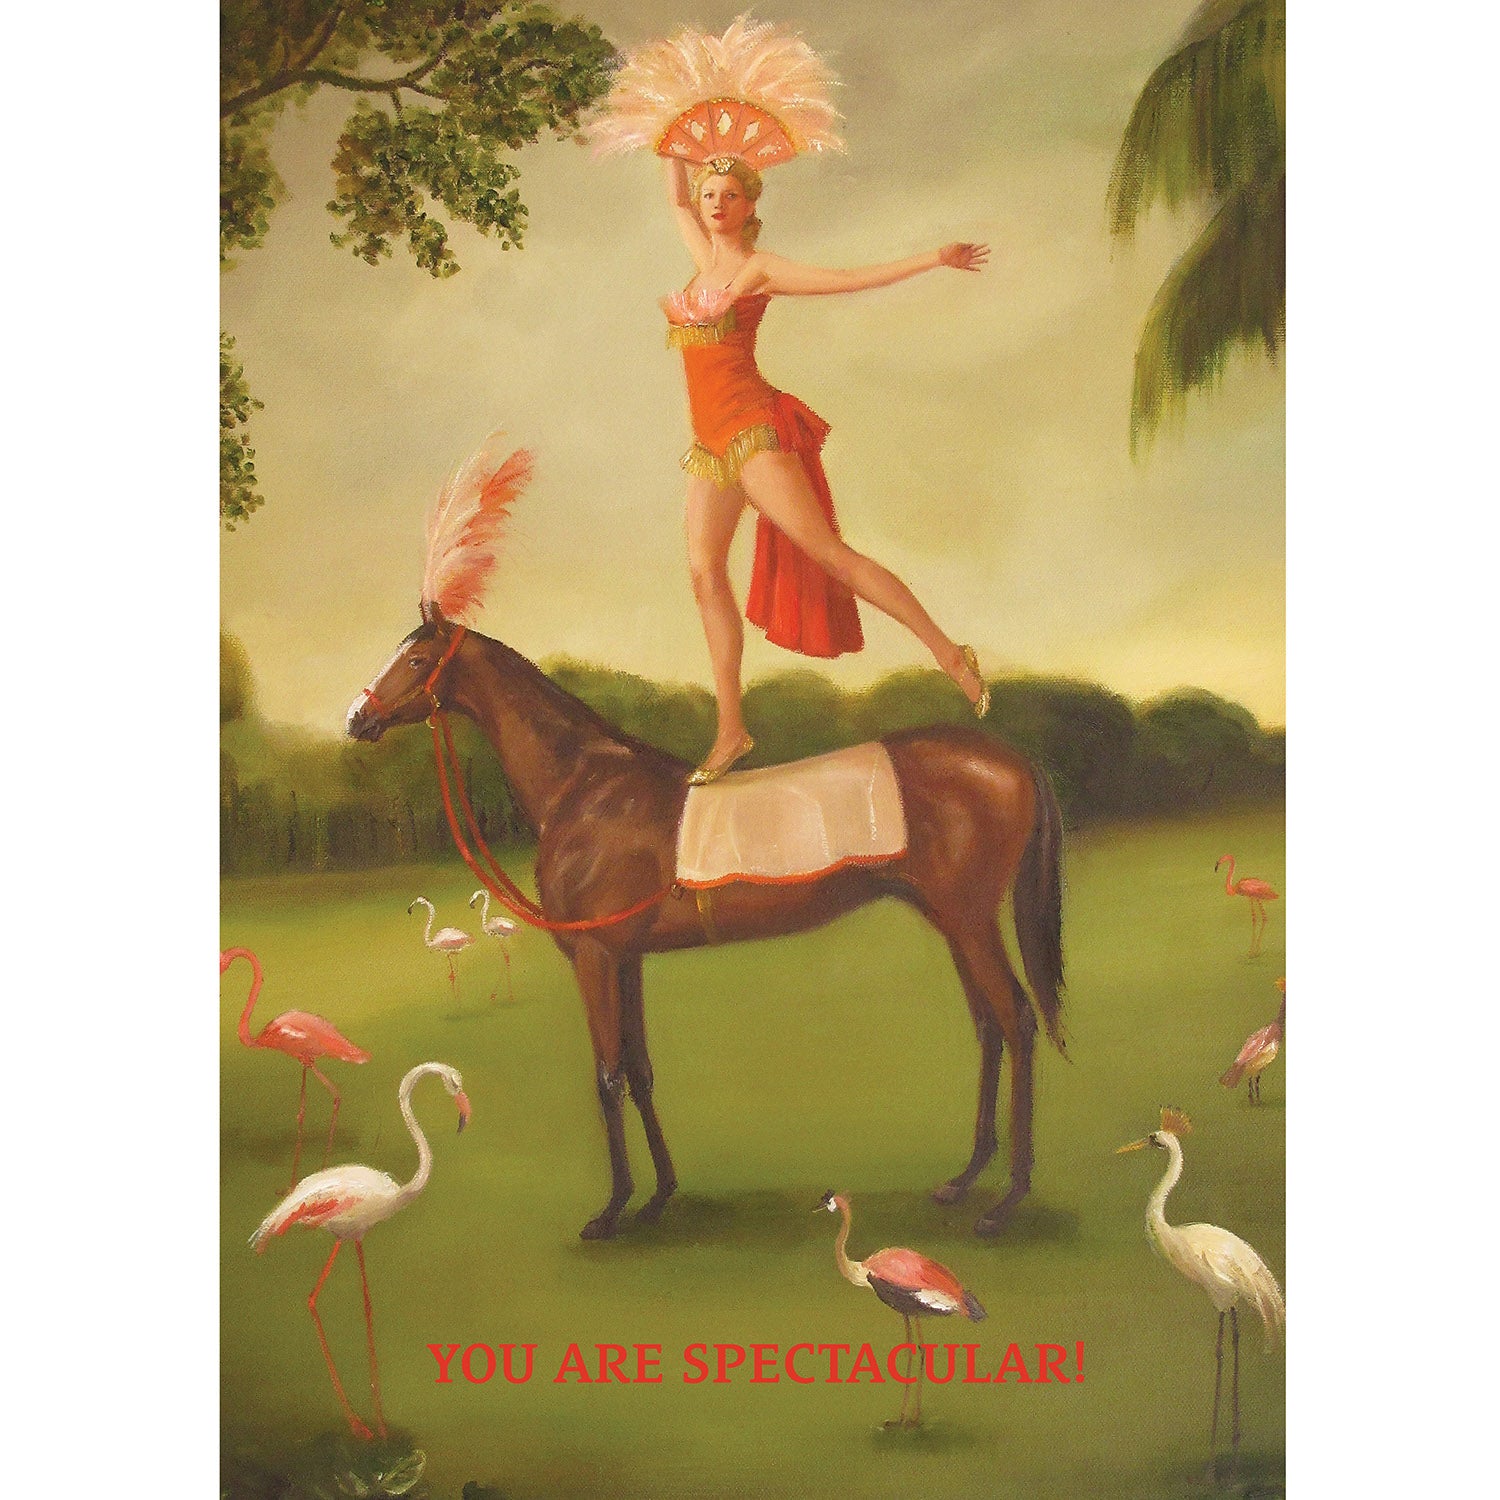 A painterly illustration of a showgirl in a coral costume with a pink feathery headdress balancing on one foot on the back of a brown circus horse dressed to match. The scene takes place on a green lawn with trees in the background, surrounded by pink flamingos. The message &quot;YOU ARE SPECTACULAR!&quot; is printed in red across the bottom of the card. 